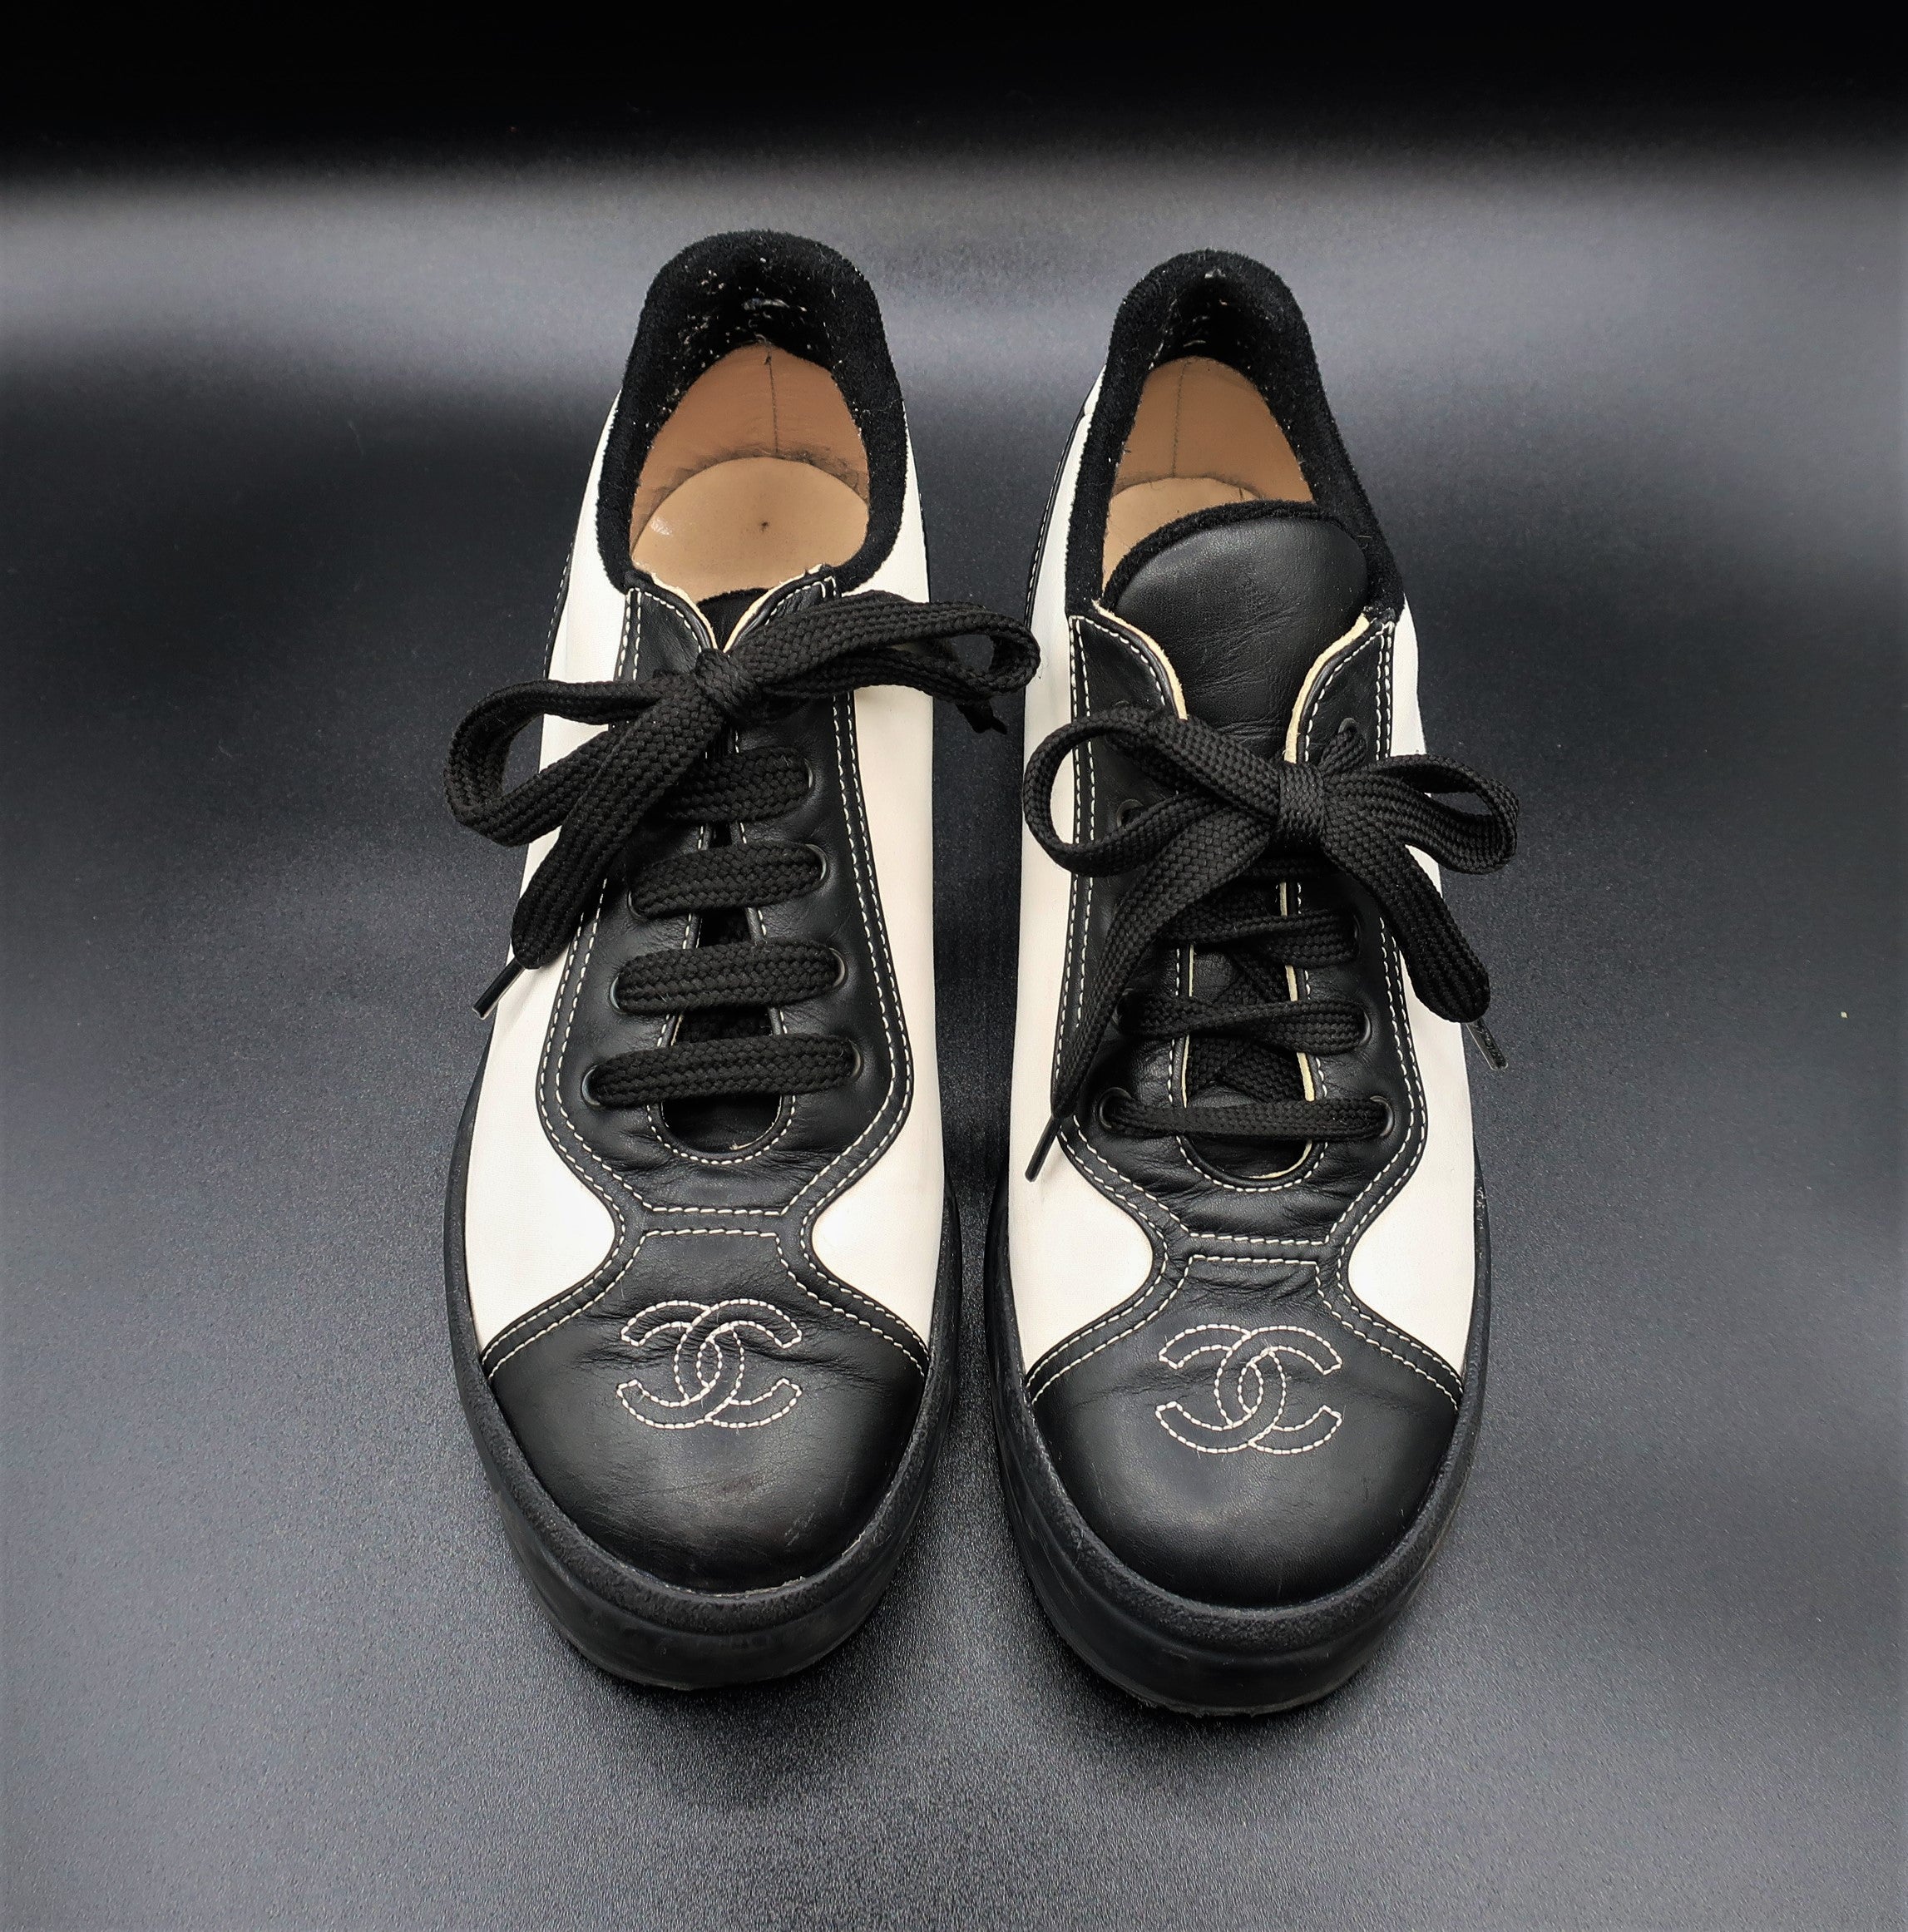 Chanel Limited Edition Fashion Sneakers for Women